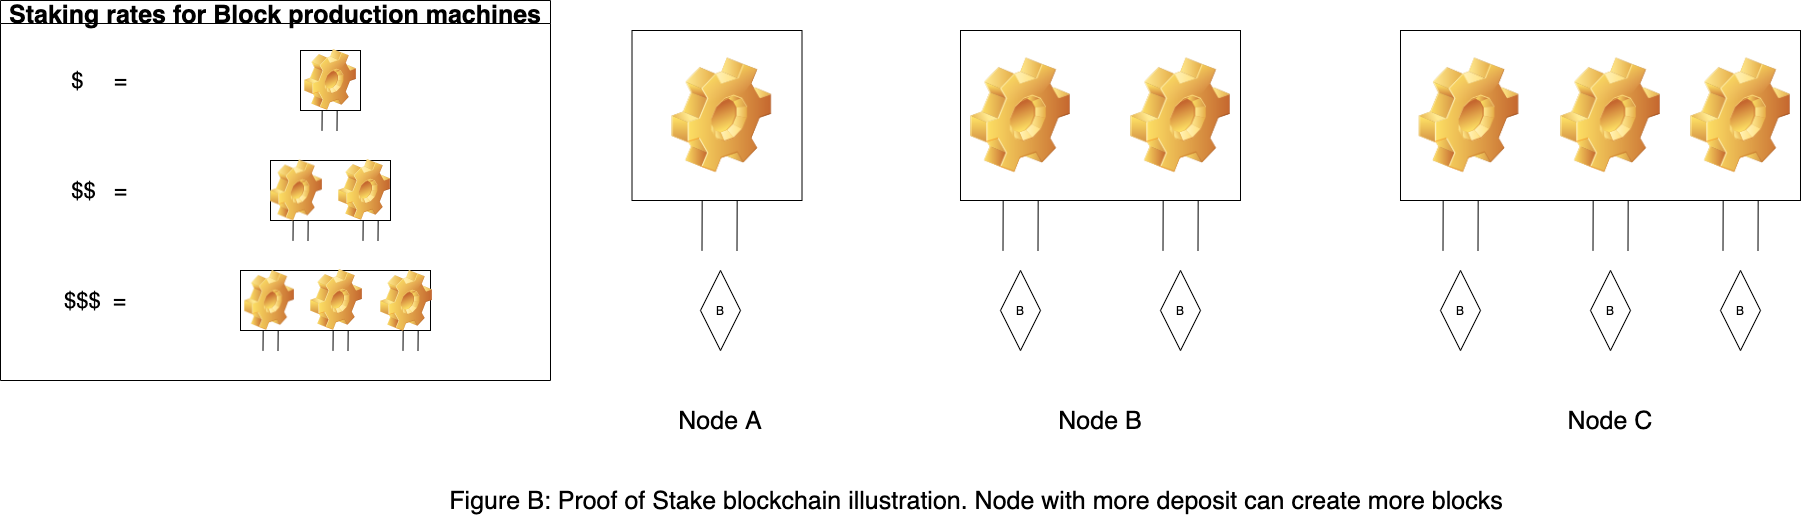 Proof of stake illustration